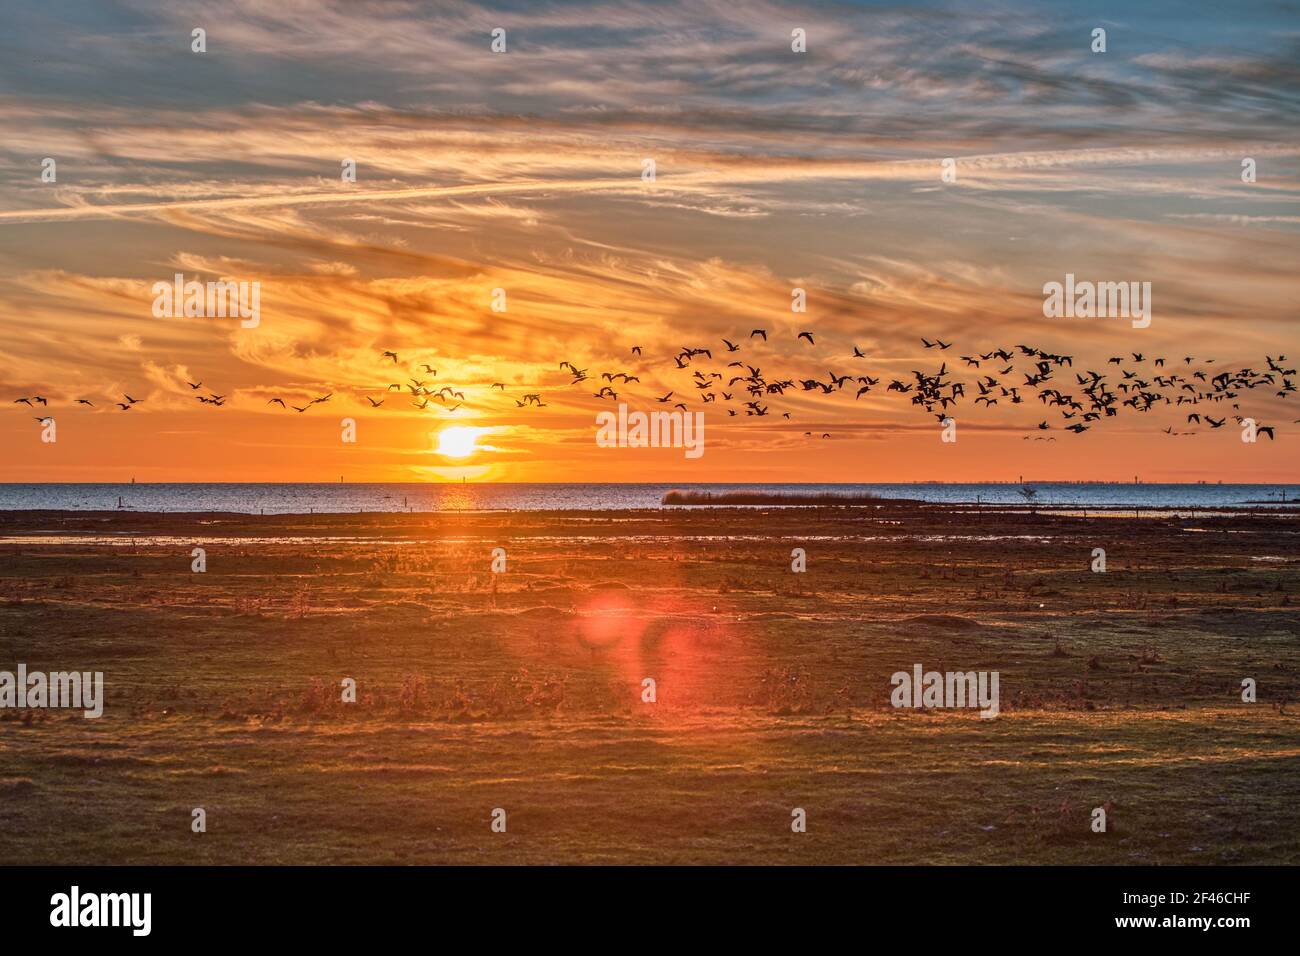 Sundown over the Baltic Sea in Bunkeflo Strandangar. Flock of sea birds crossing the scene at sunset on the green nature reserve conveying tranquility Stock Photo